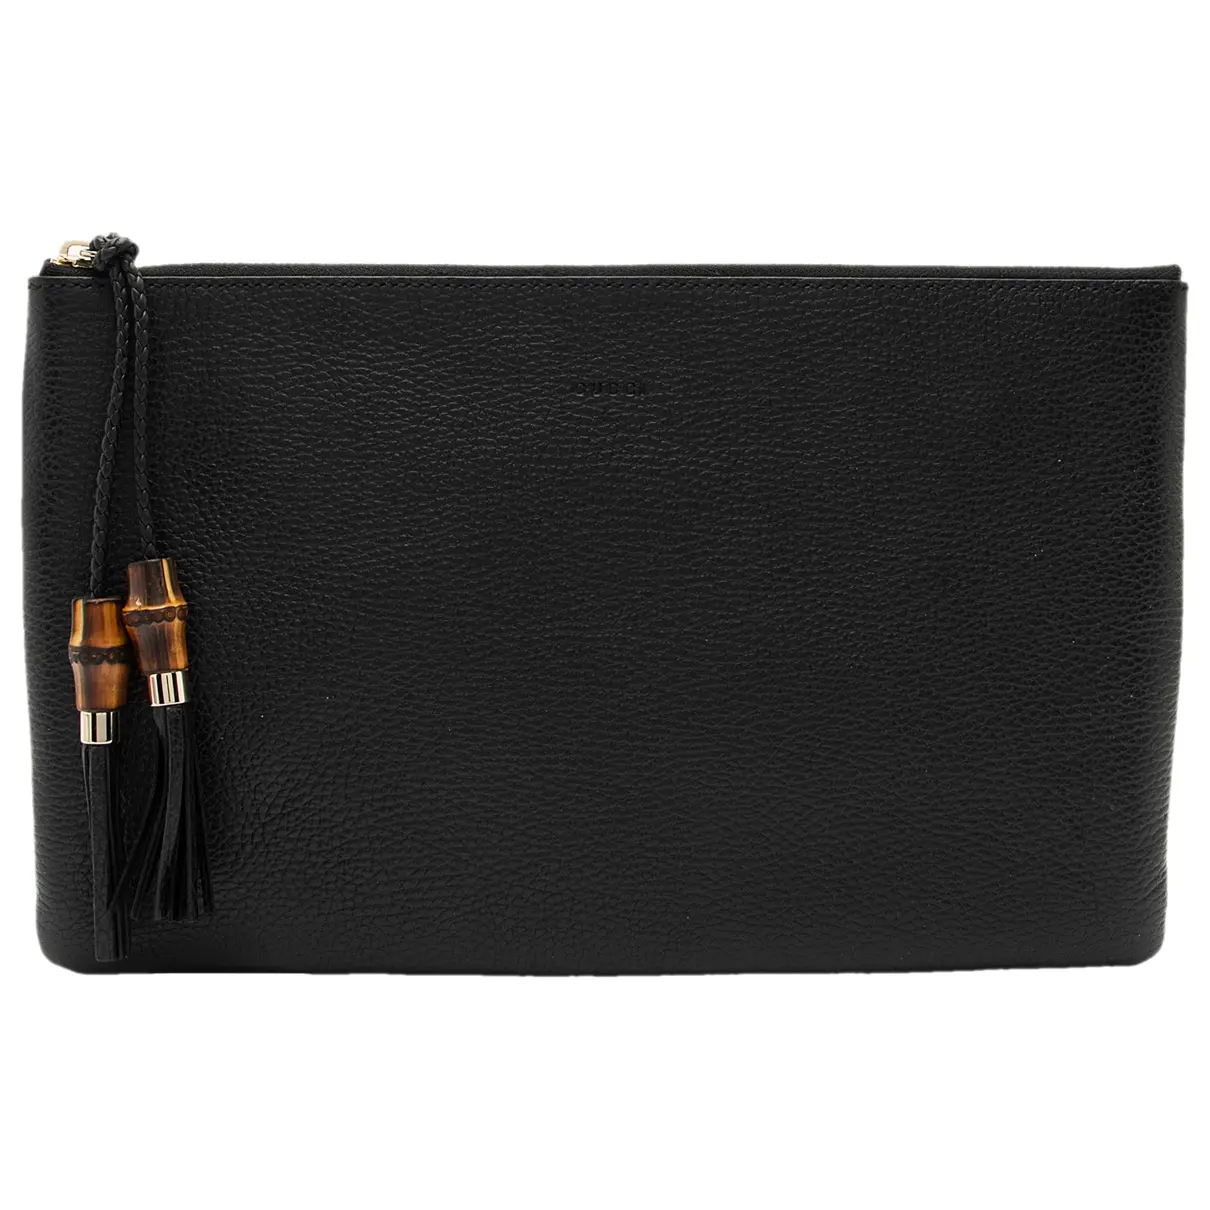 Bamboo leather clutch bag